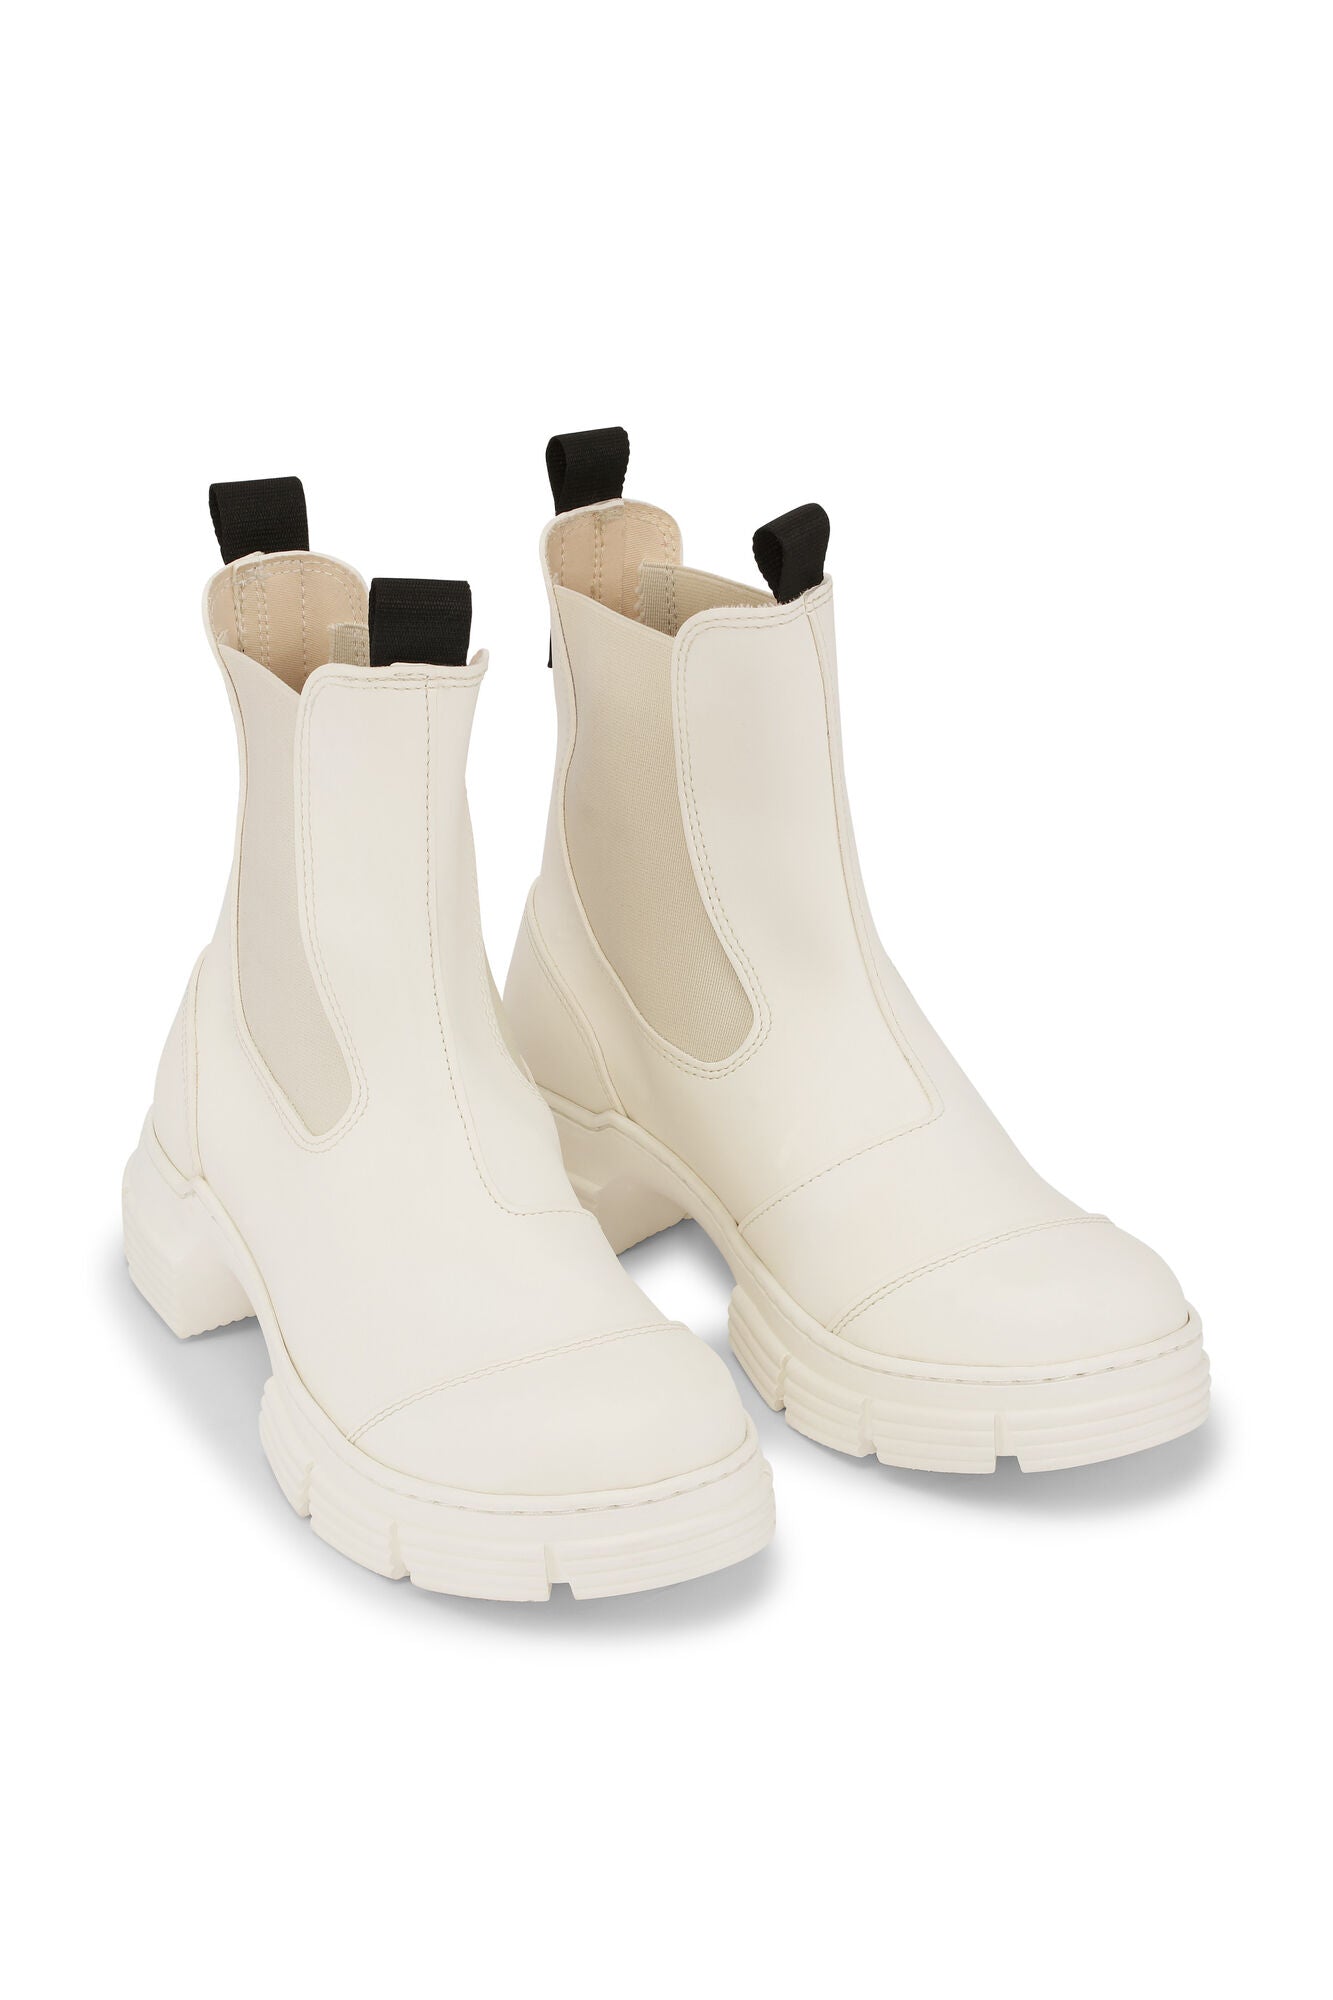 GANNI Recycled Rubber City Boot in Egret